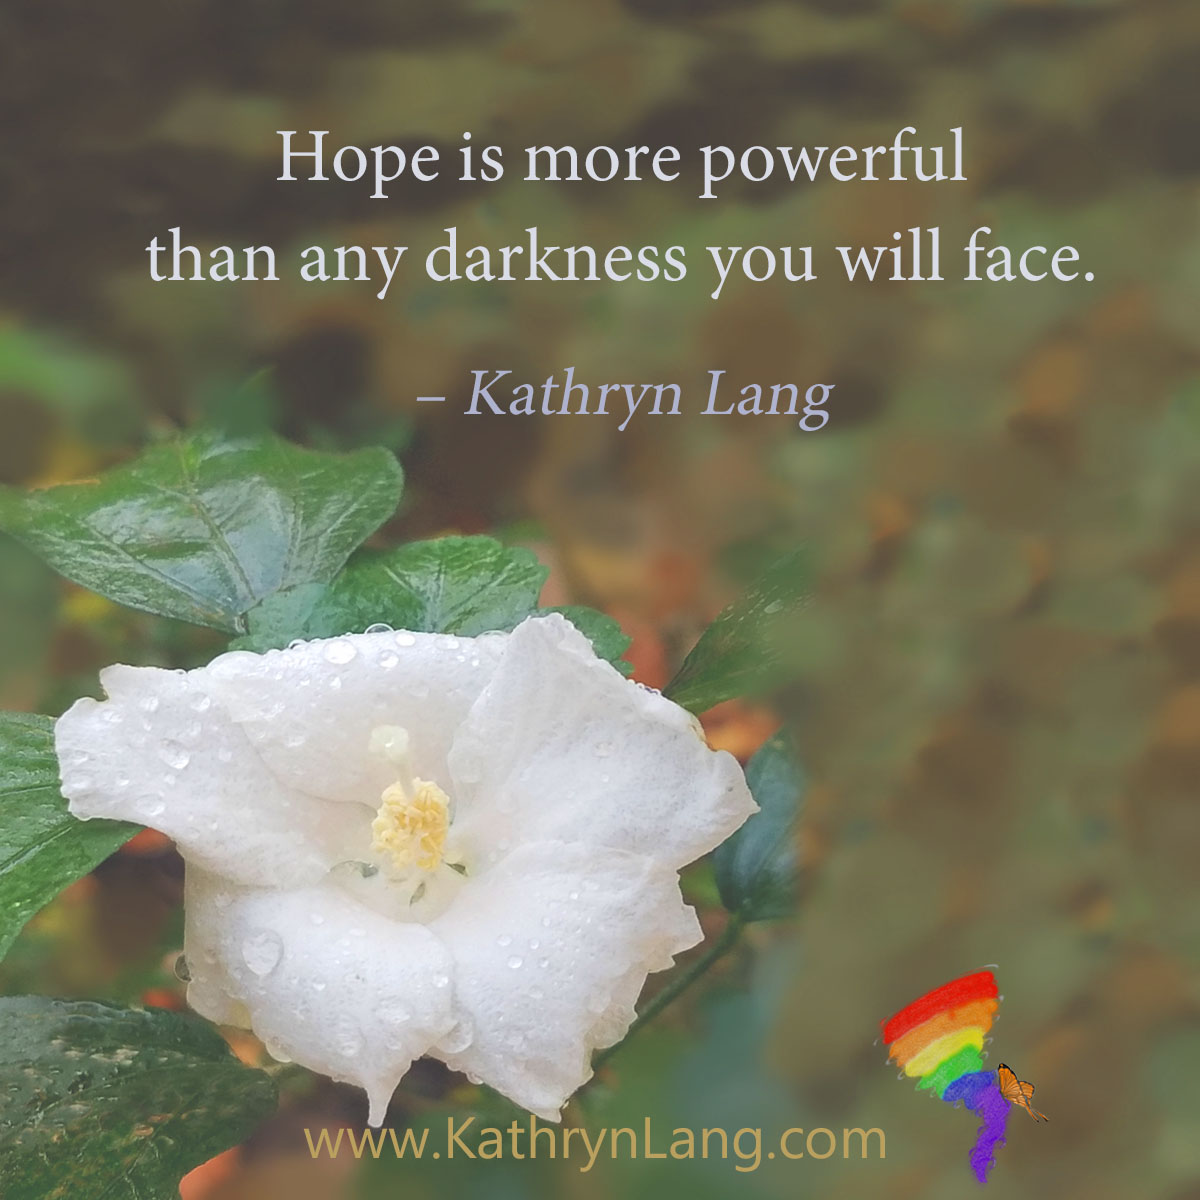 #QuoteoftheDay

Hope is more powerful than any darkness you will face.